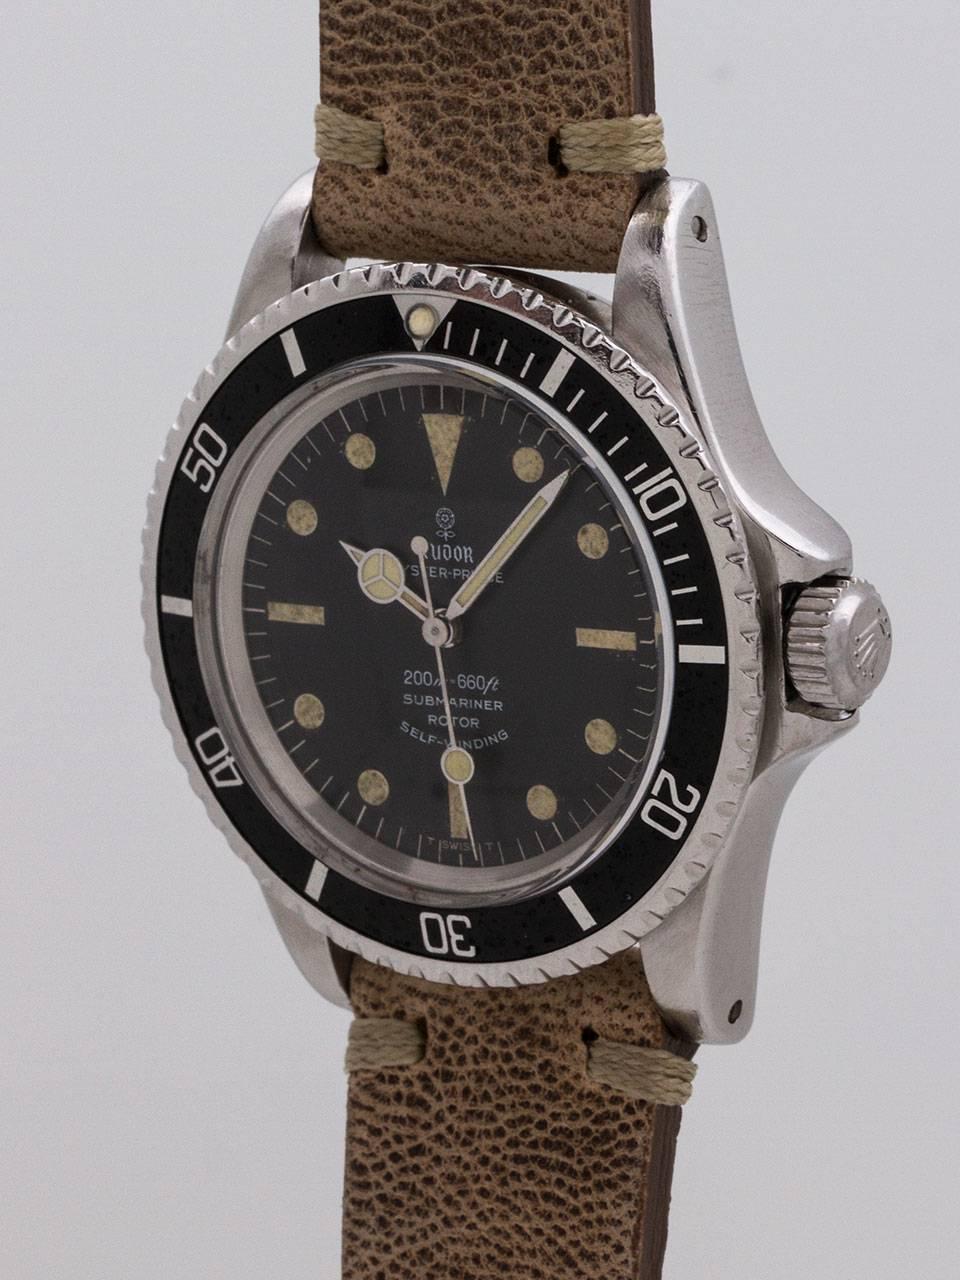 Tudor Submariner ref 7928 serial number 570,xxx circa 1967. 40mm diameter stainless steel case with bi-directional elapsed time bezel. With matte black dial with patina’d luminous indexes and matching luminous hands. With Tudor flower logo and